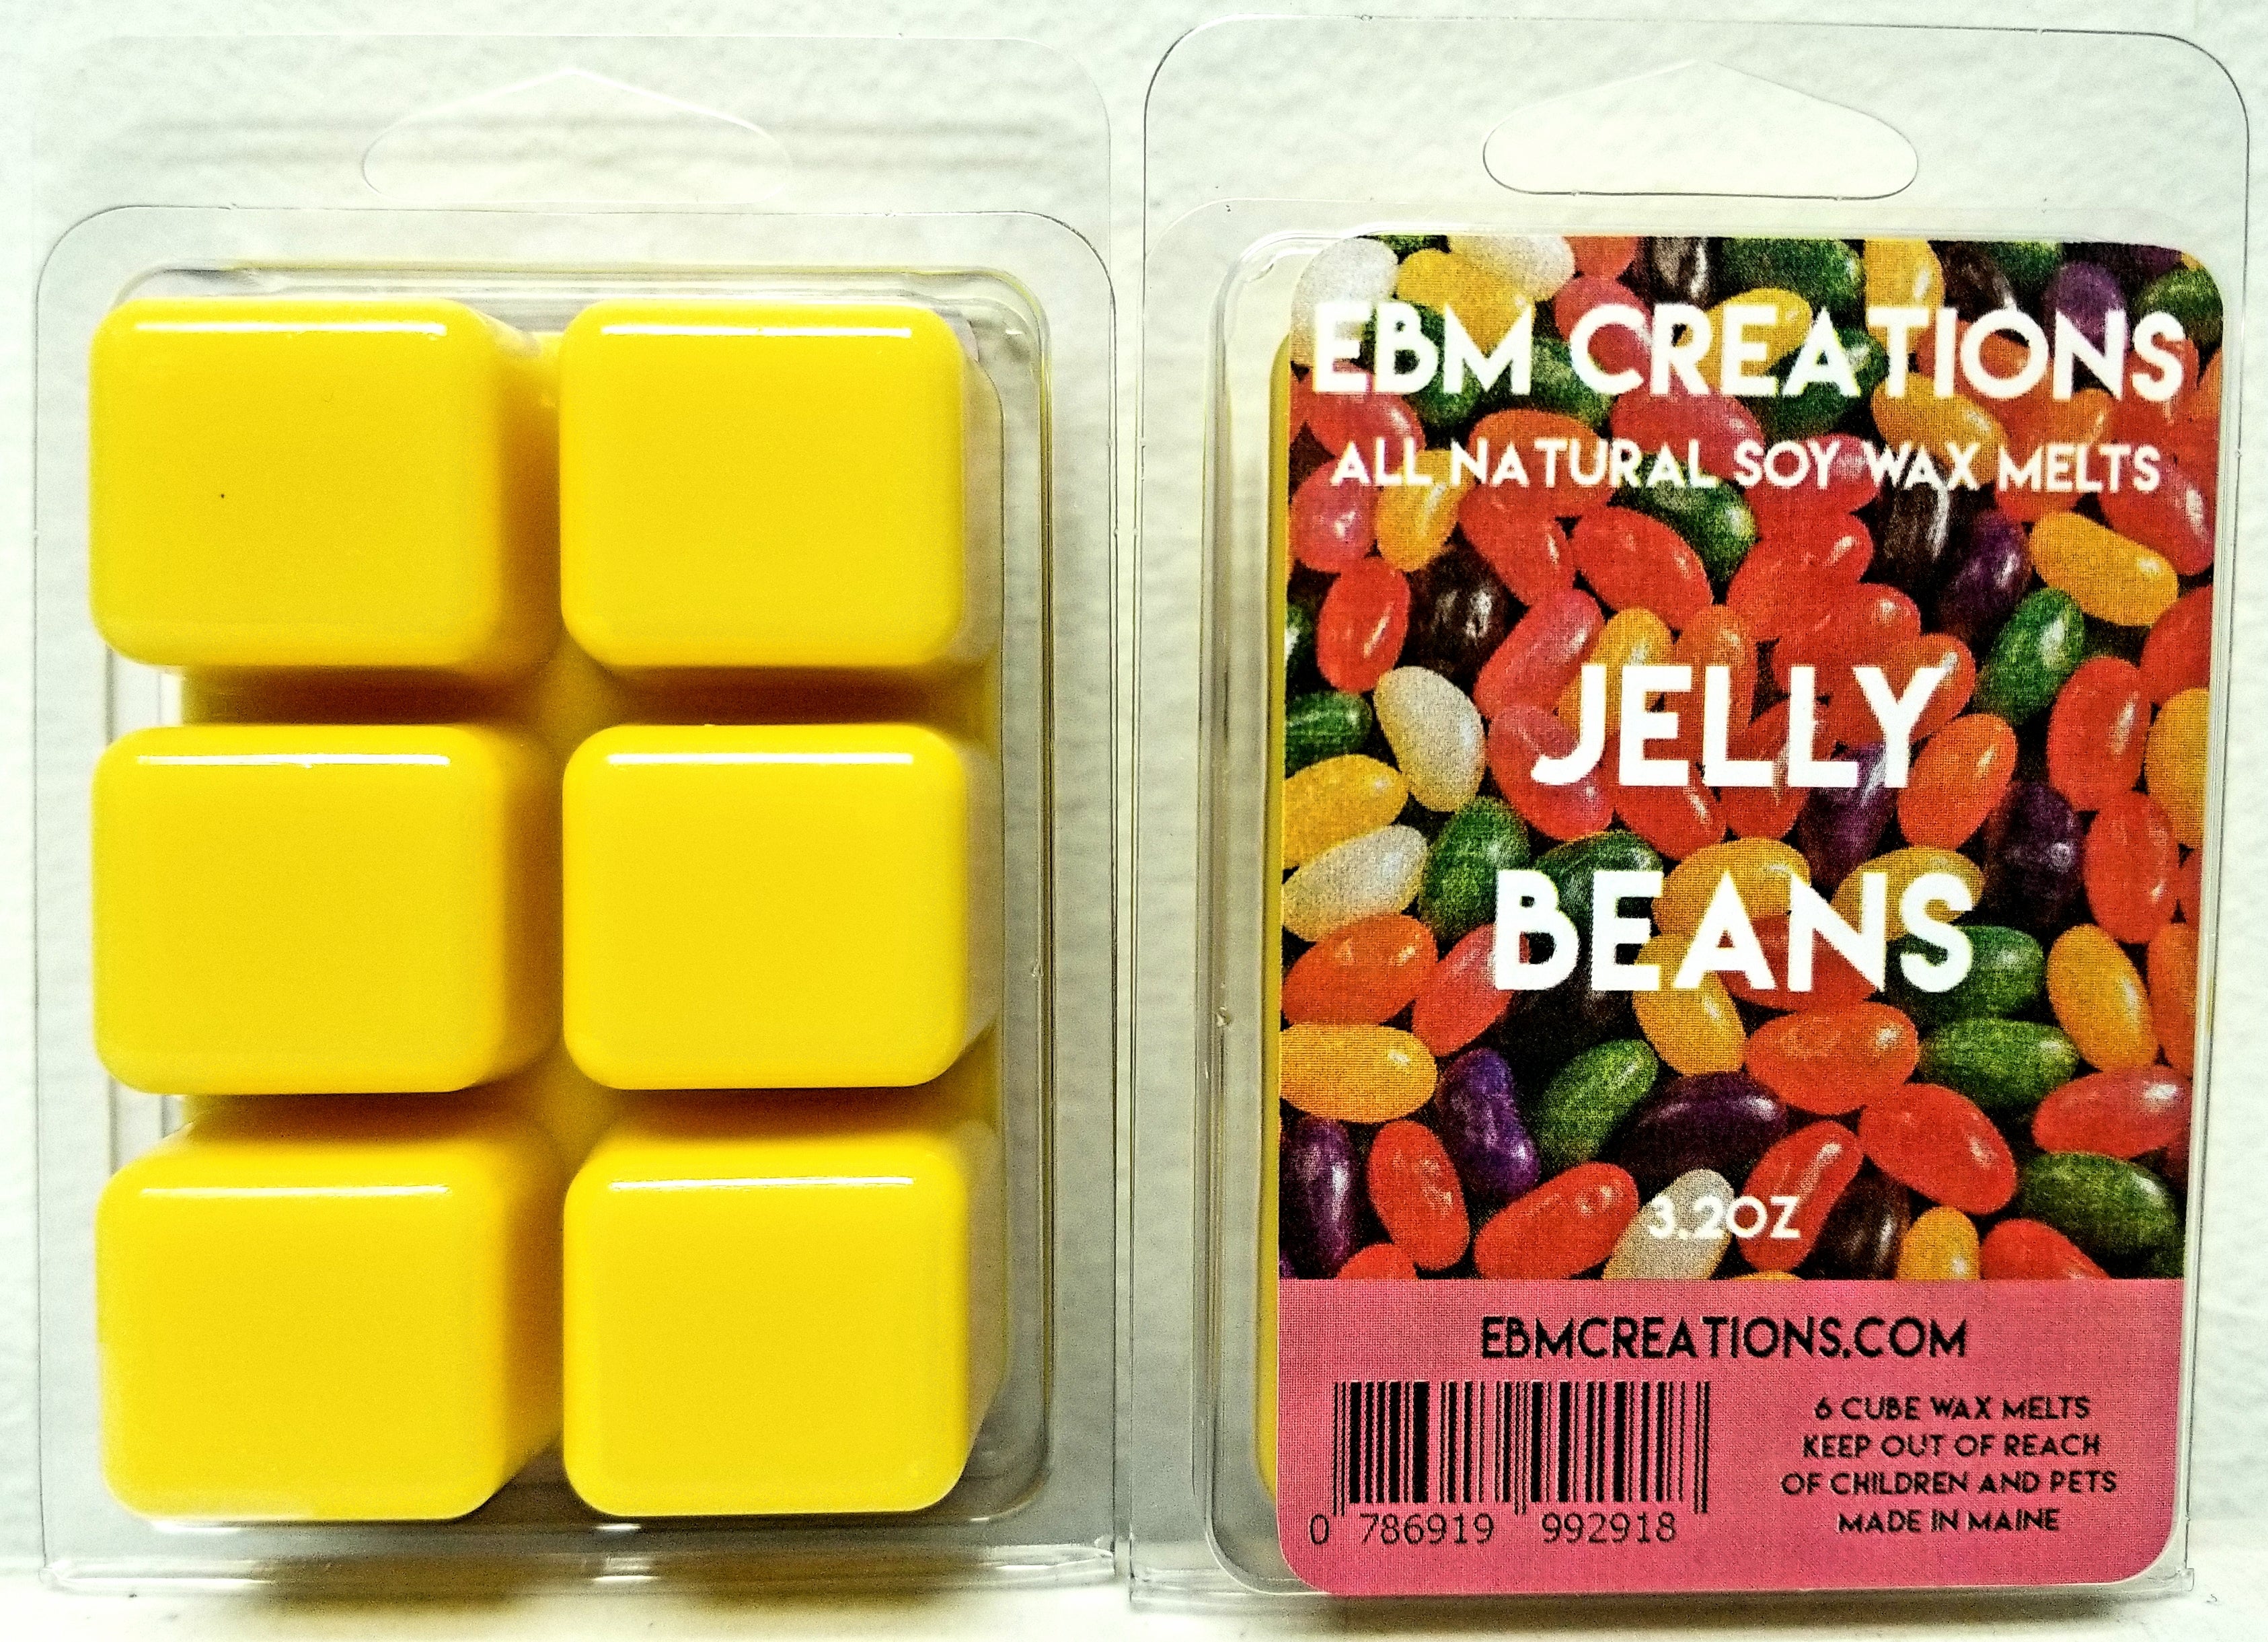 Jelly Beans - 3.2 oz Clamshell